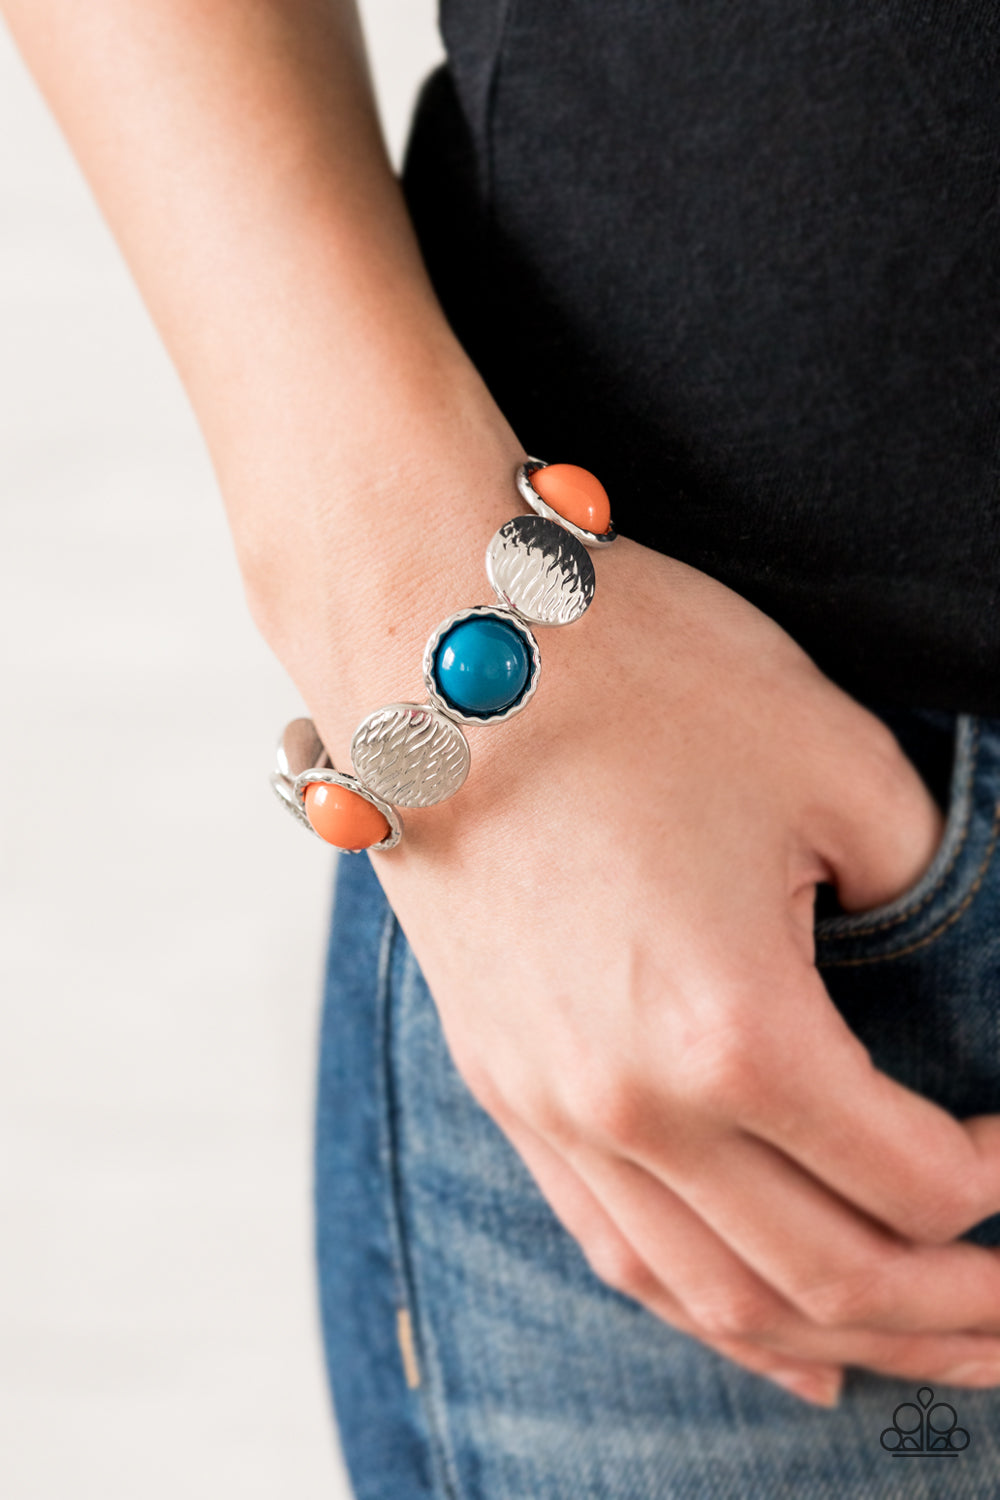 Embossed in wavy textures, shiny silver discs and bubbly orange and Mosaic Blue beaded frames are threaded along a stretchy band around the wrist, creating a colorful statement piece.